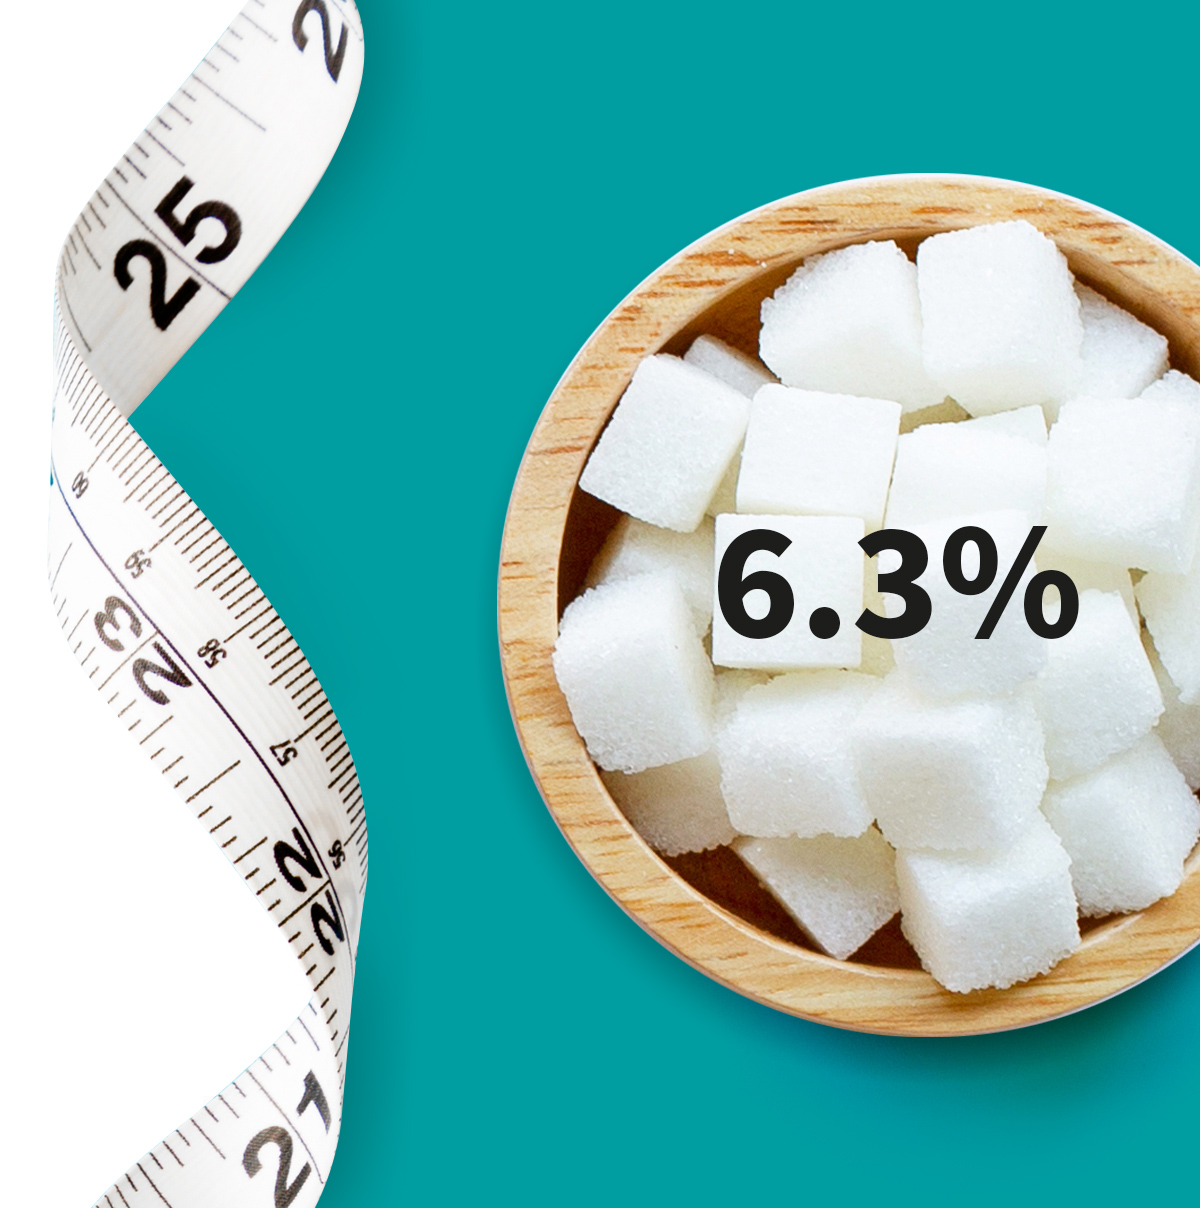 [.NL-fr Netherlands (french)] A measuring tape and a bowl full of sugar cubes shown as a metaphor for diabetes